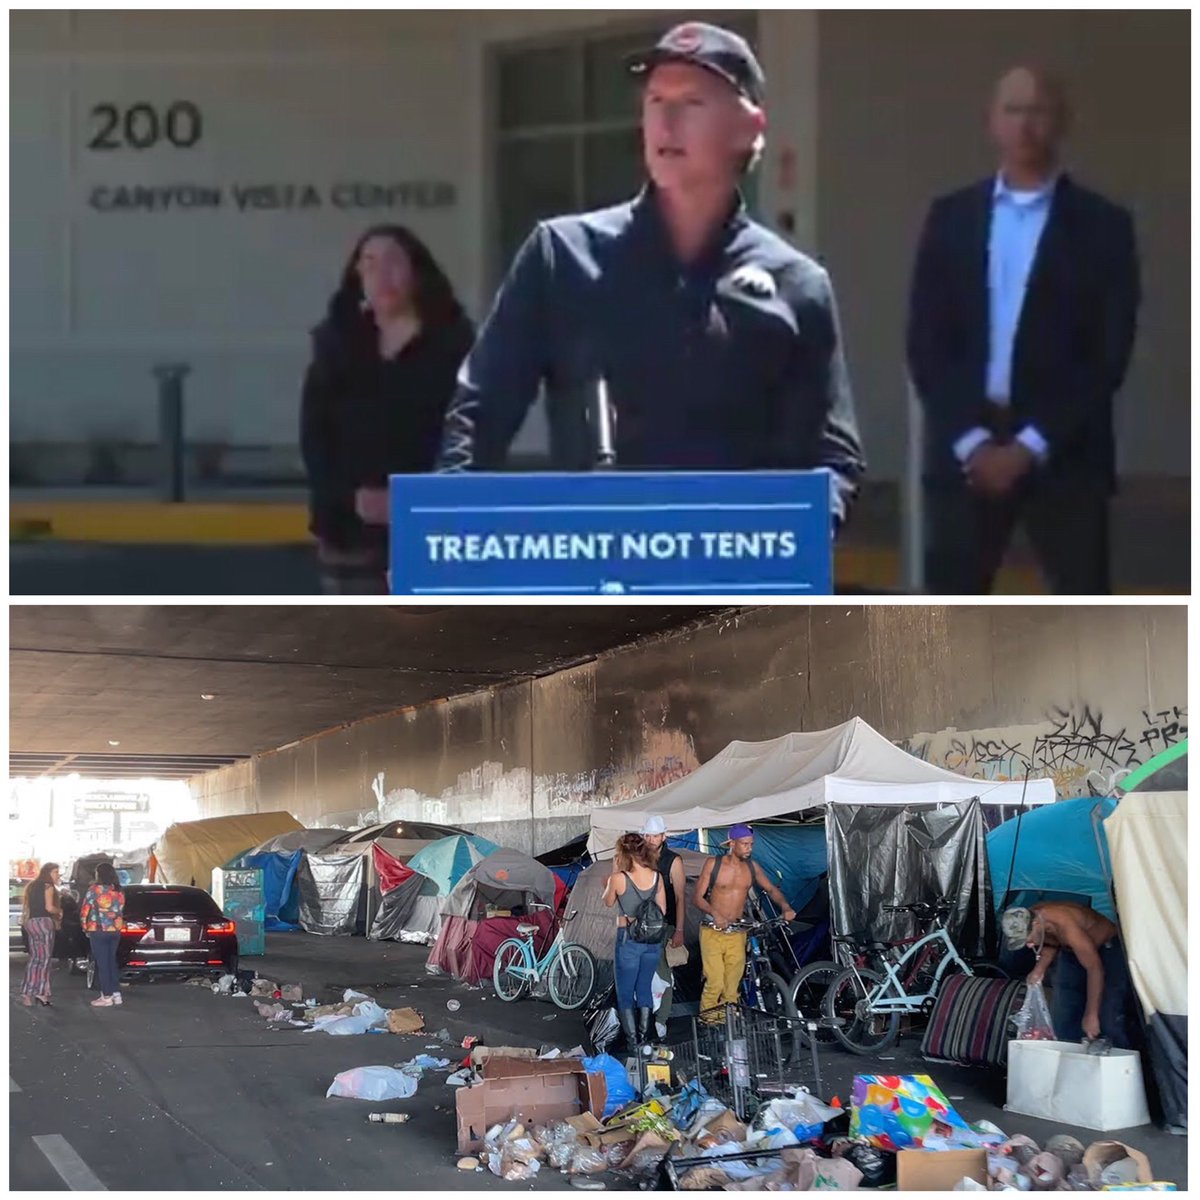 Governor Newsom has been #Markled. He spent time during a news conference to address Harry and Meghan’s private delinquent charity & not address the thousands of homeless people in his county, which is up from last year & 70% higher than 2015. Corrupt politicians and grifters 🤦🏾‍♂️